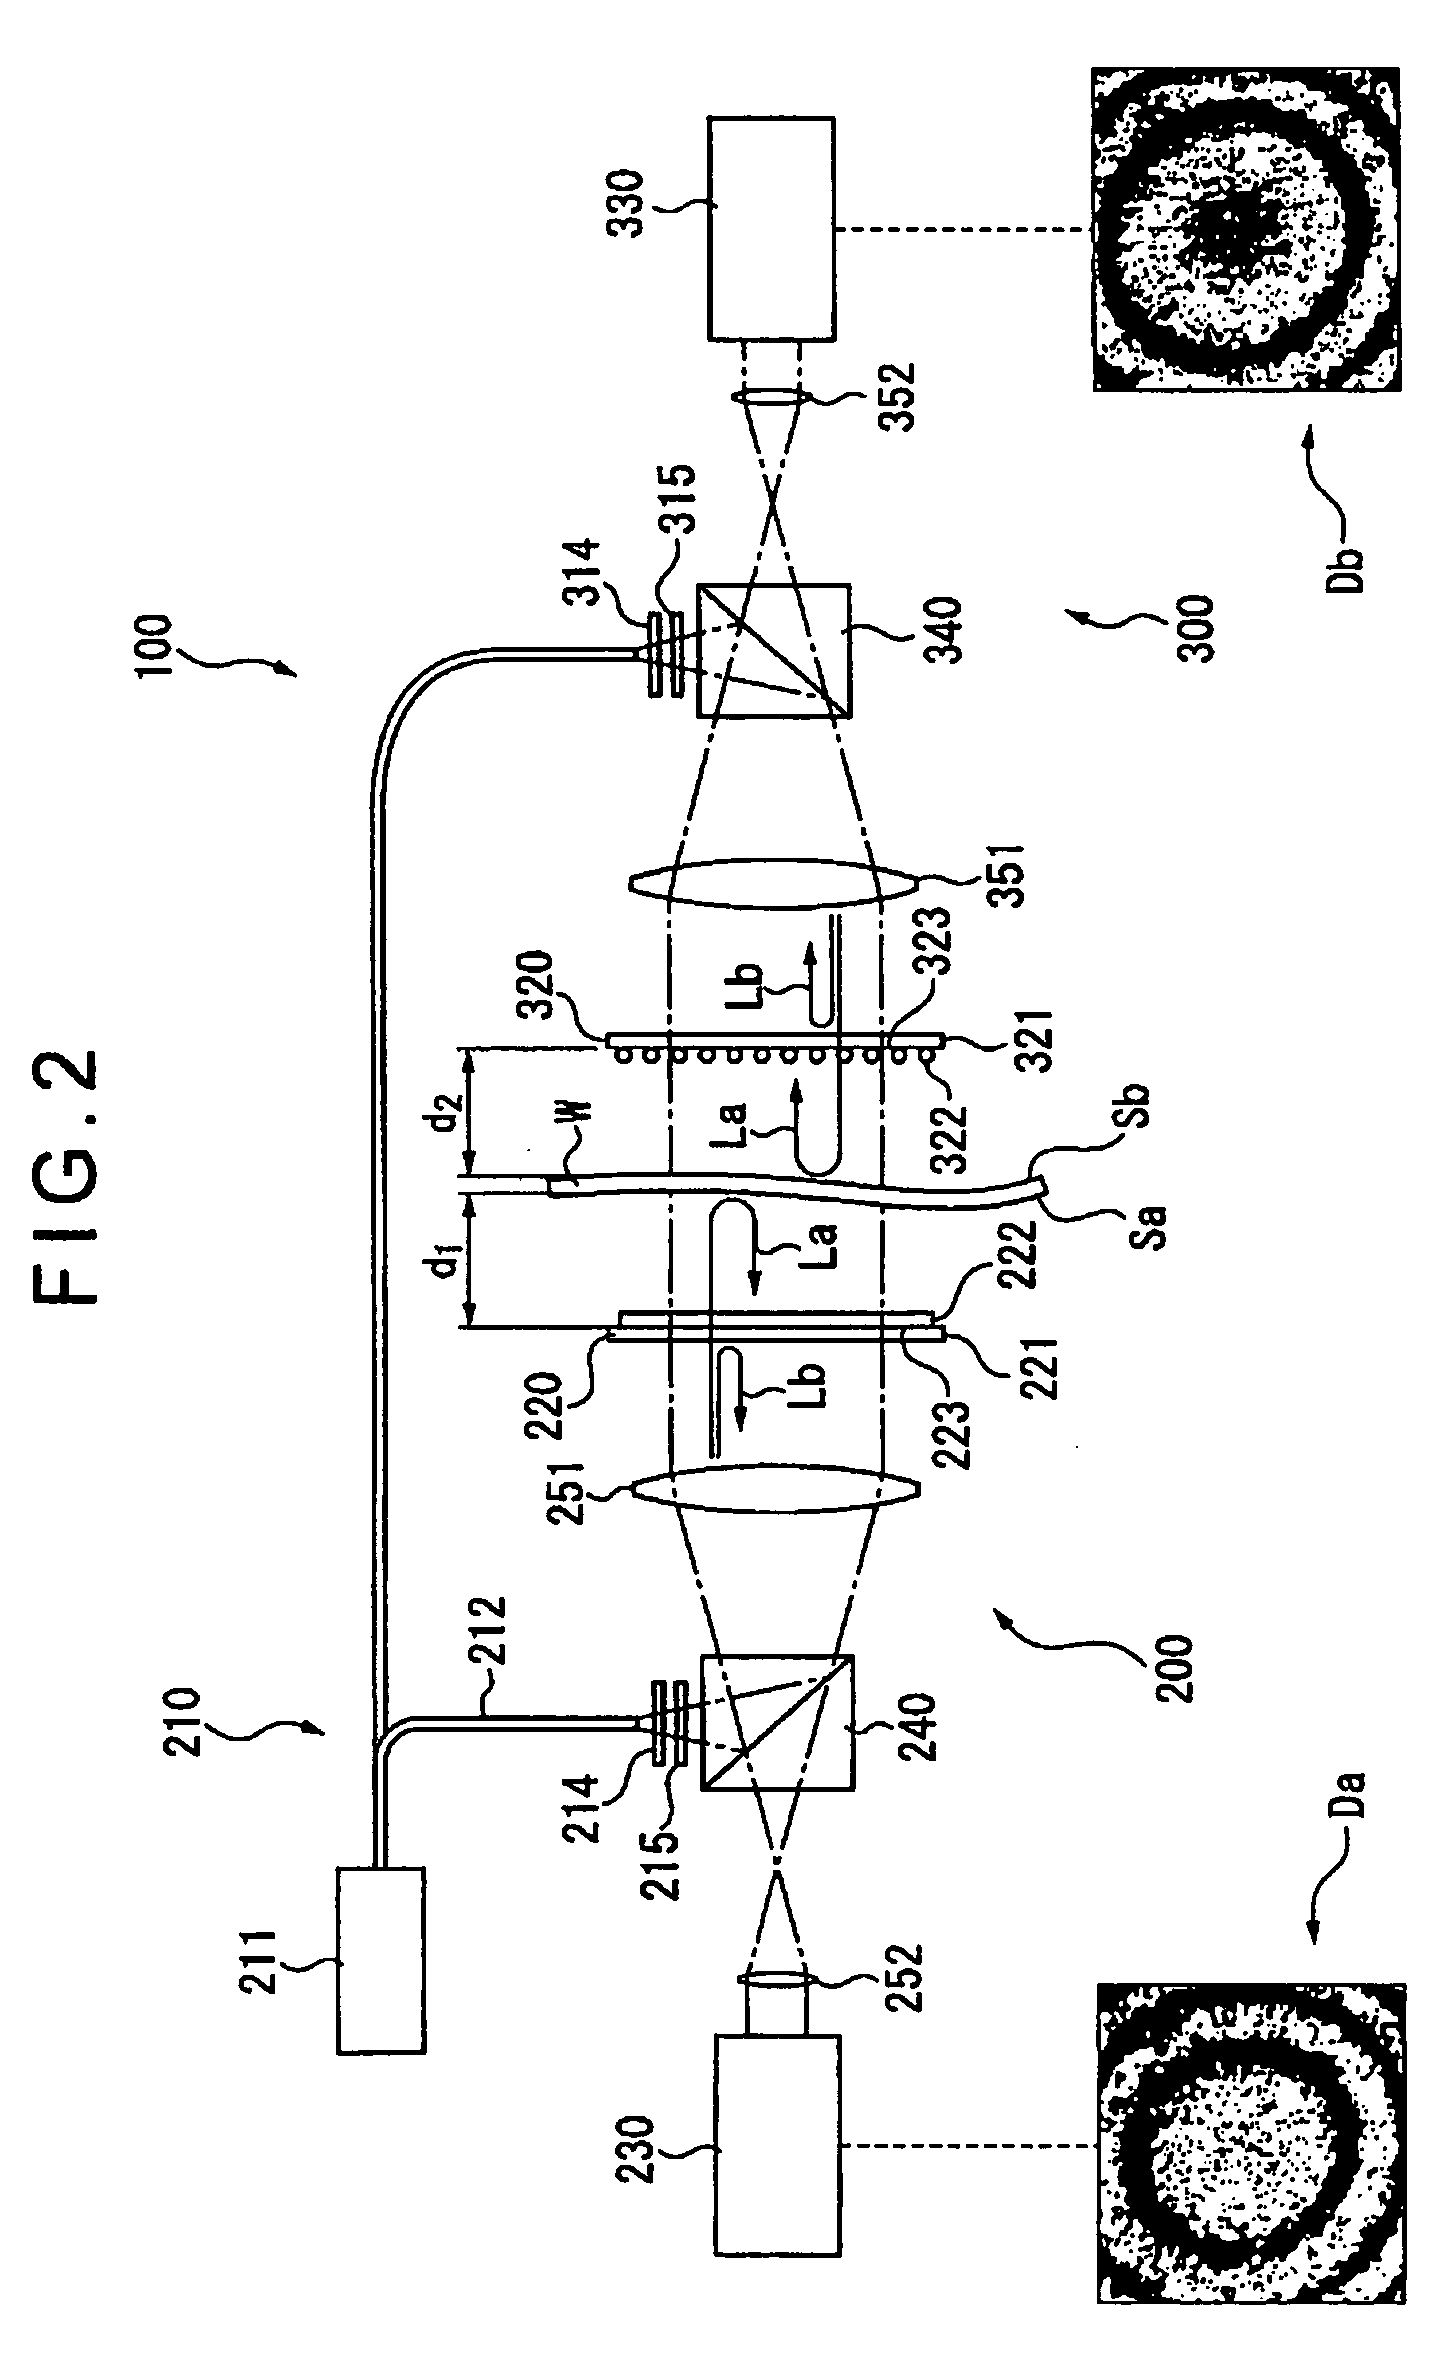 Dual polarization interferometers for measuring opposite sides of a workpiece